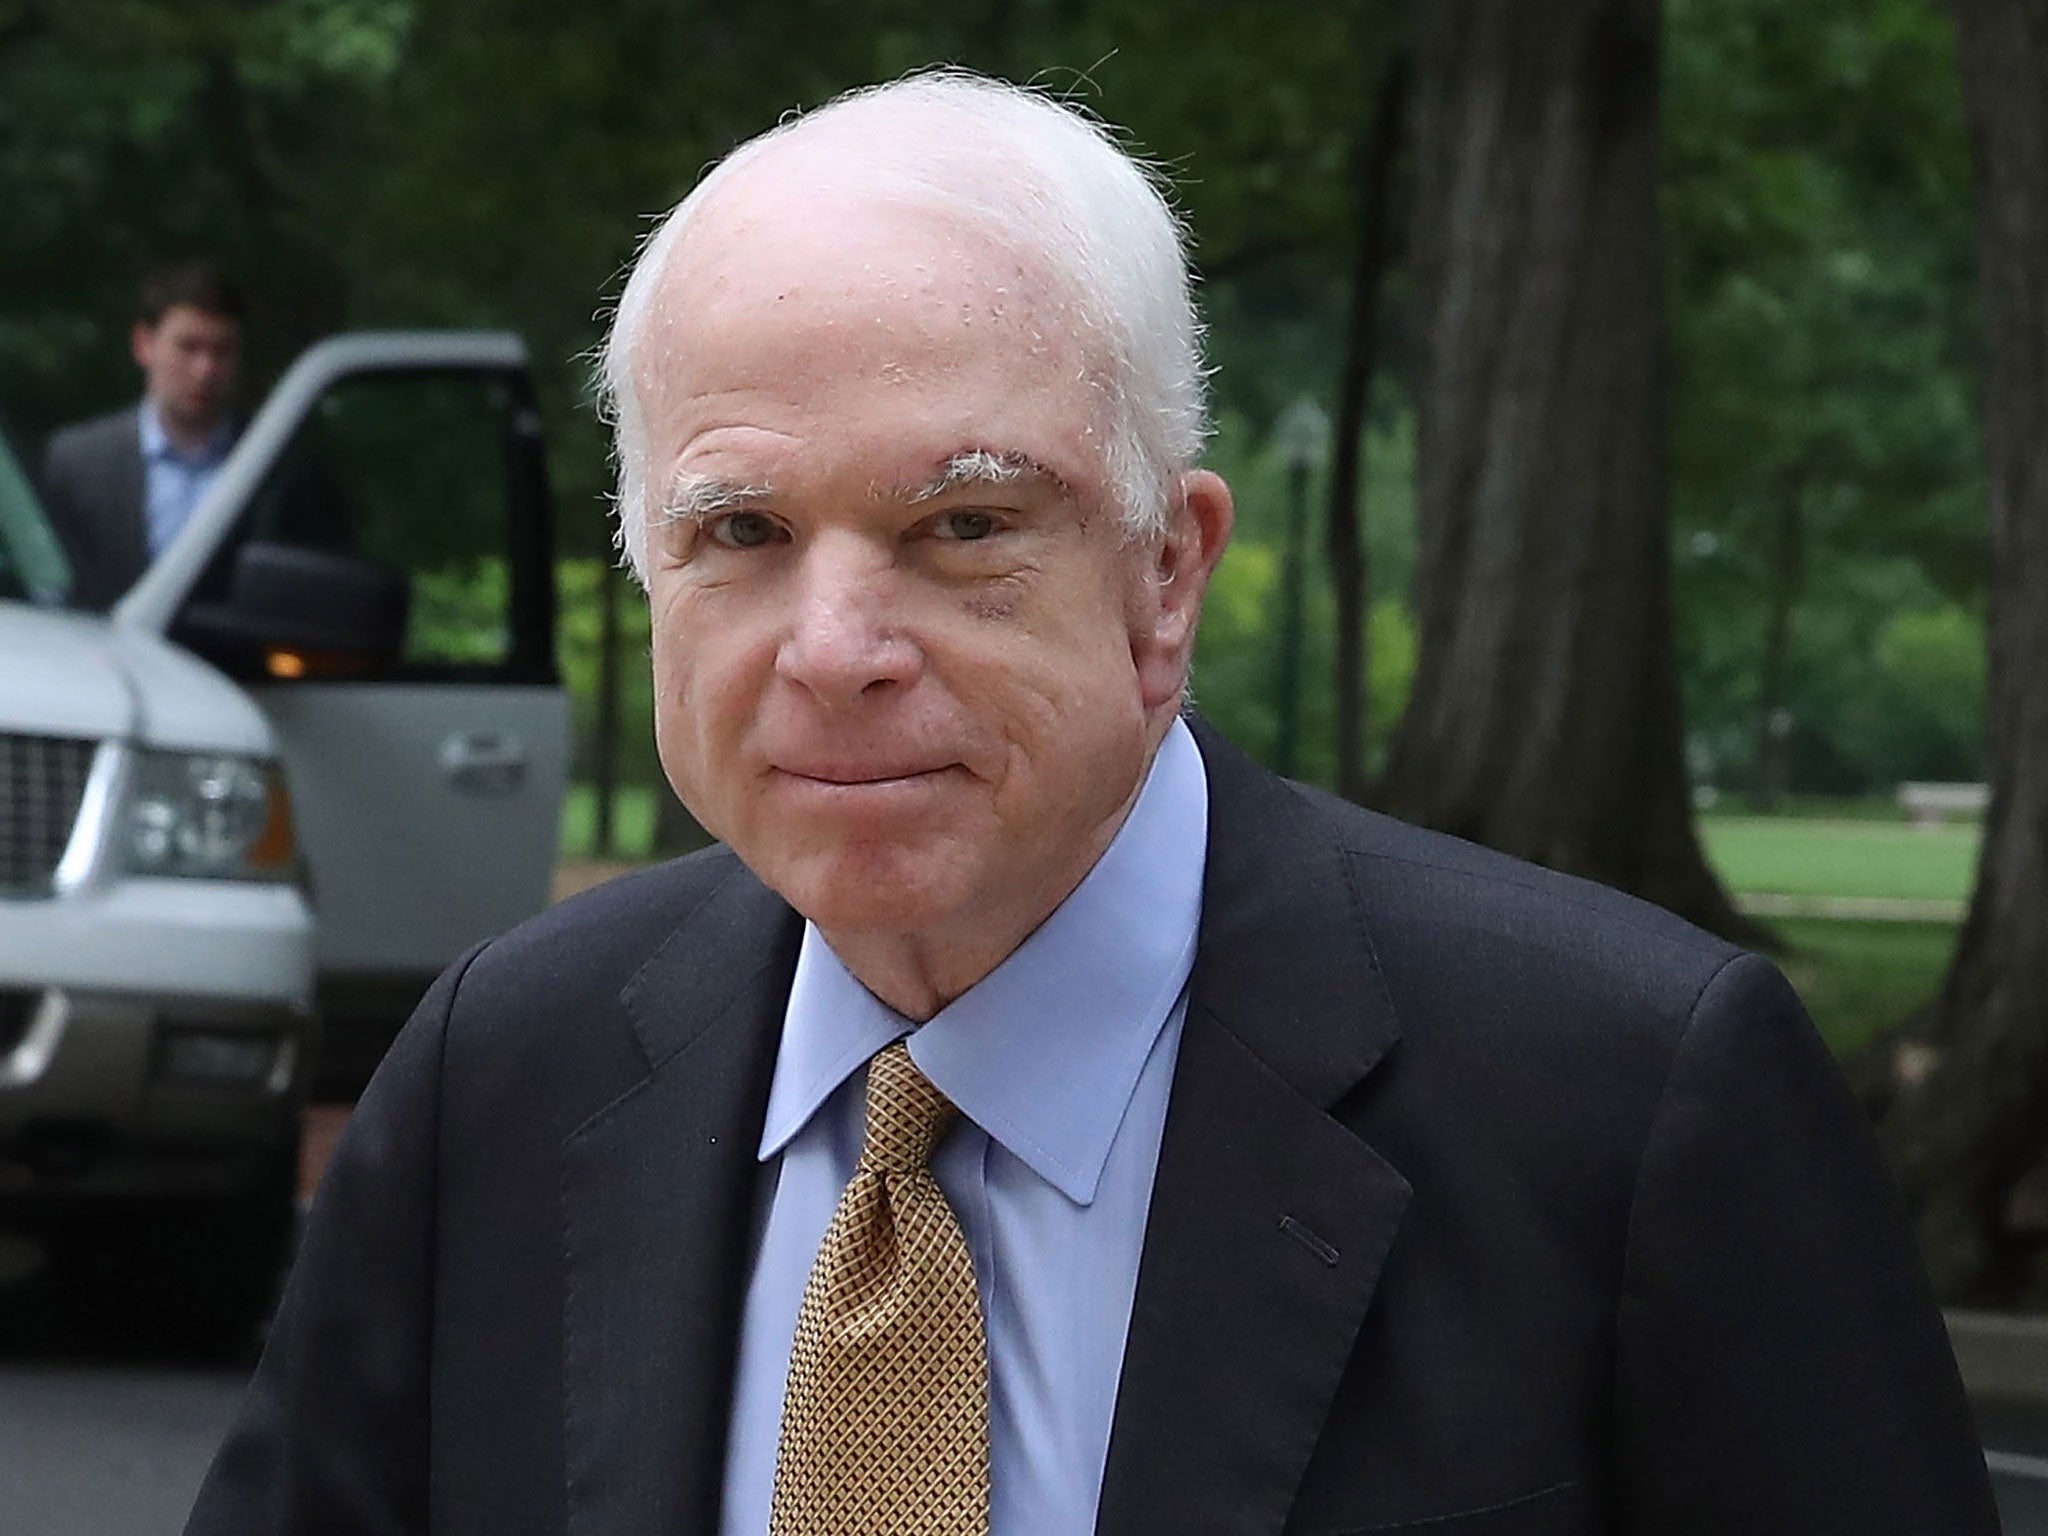 John McCain, who has undergone treatment for brain cancer, has been a vocal critic of the US President